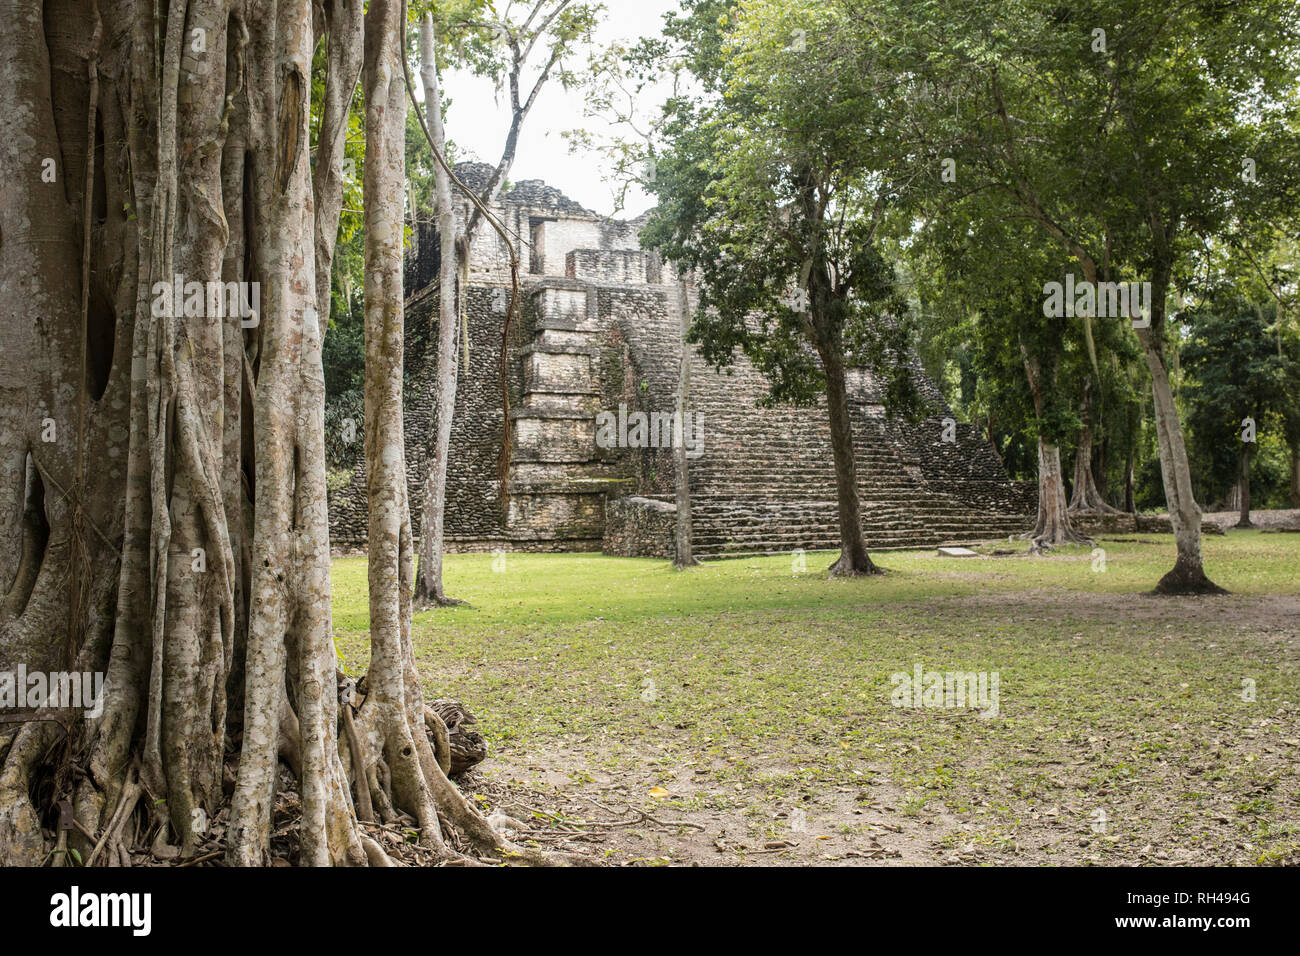 Jungle vines with the Mayan temple of Dzibanche out of focus in the background. Stock Photo